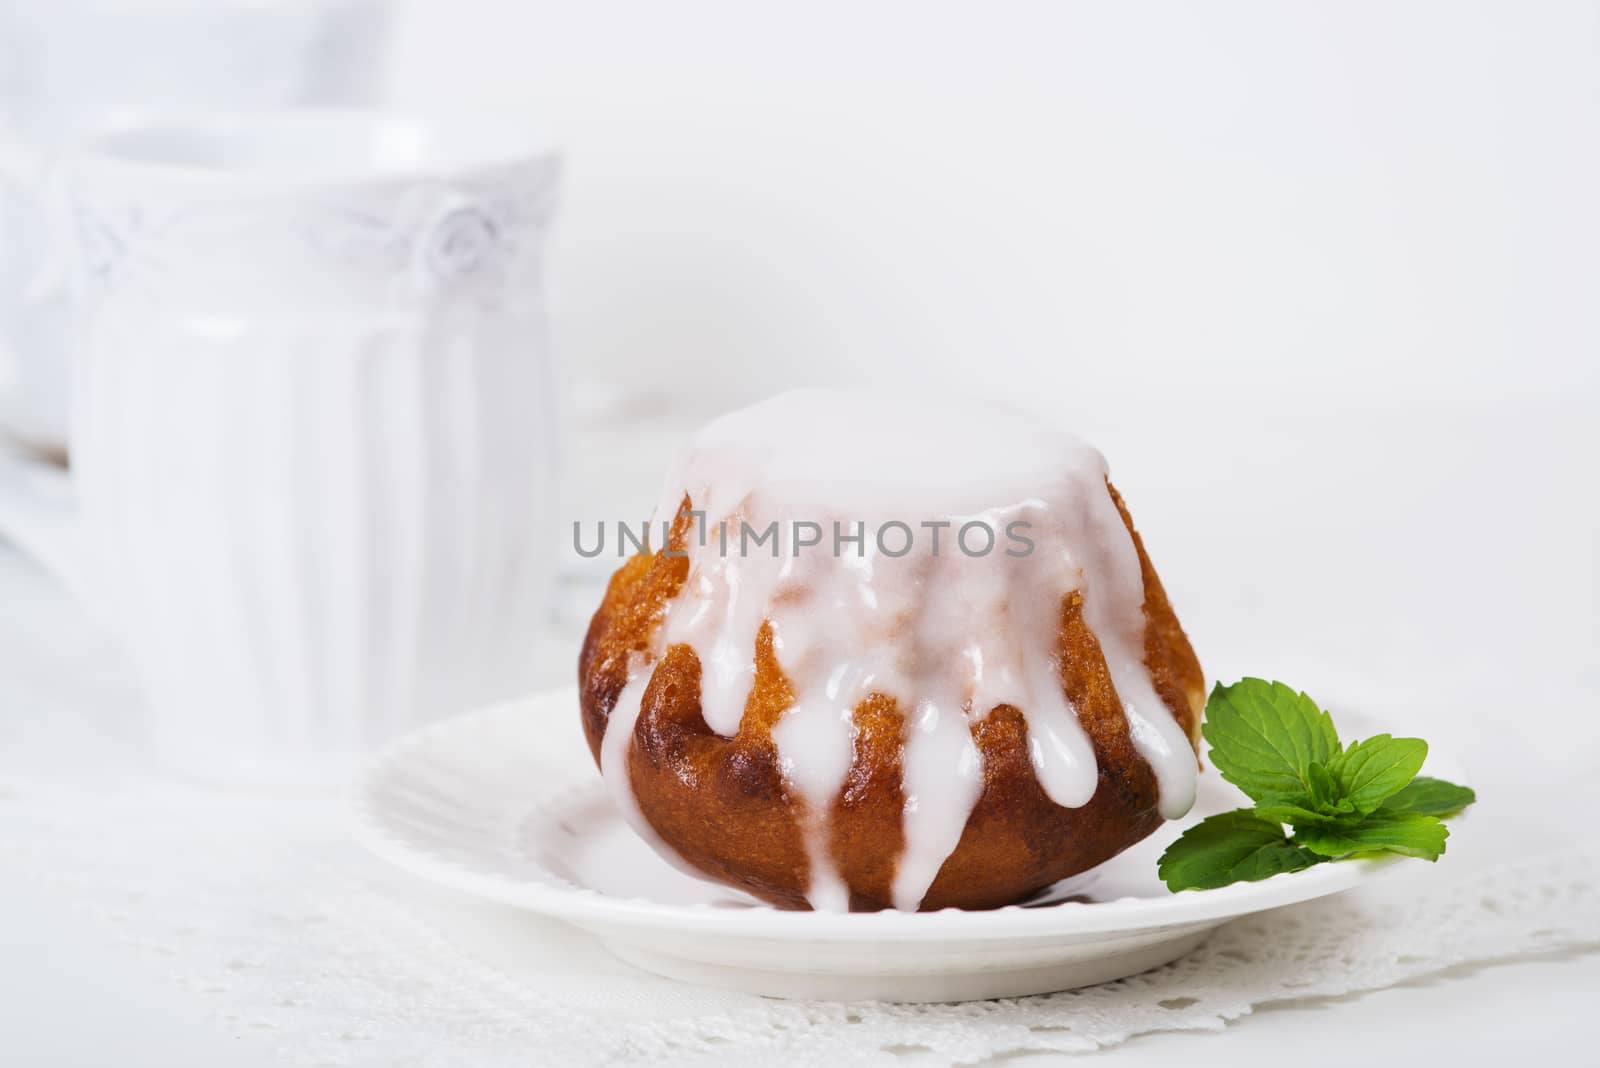 Rum baba cake on plate by kzen